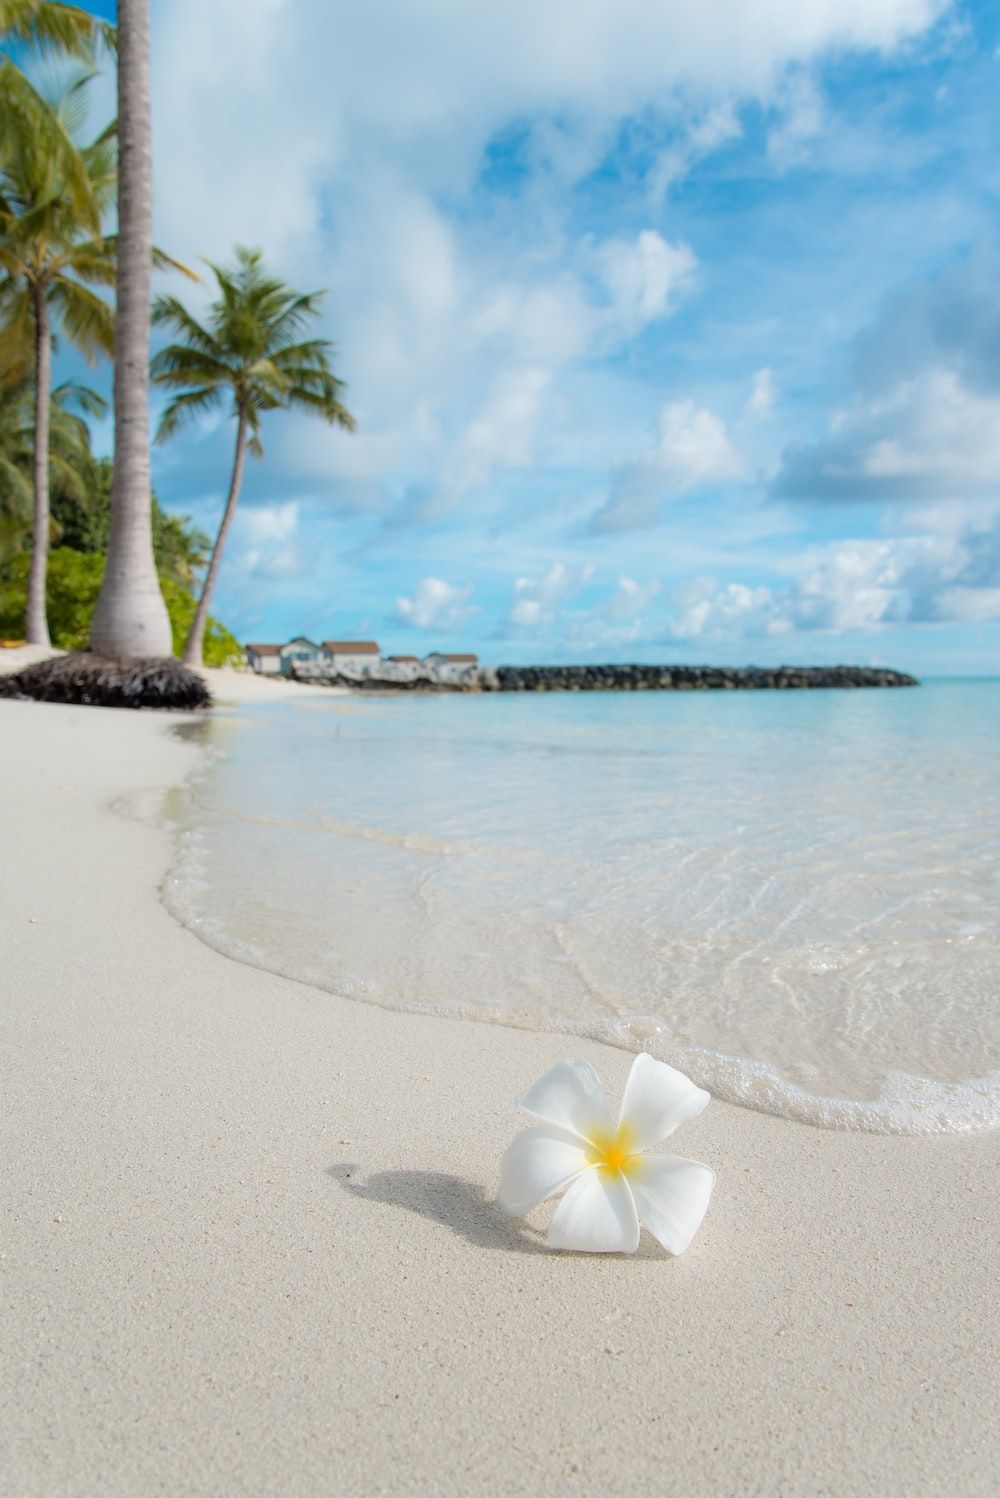 Tropical Beach Picture. Download Free Image